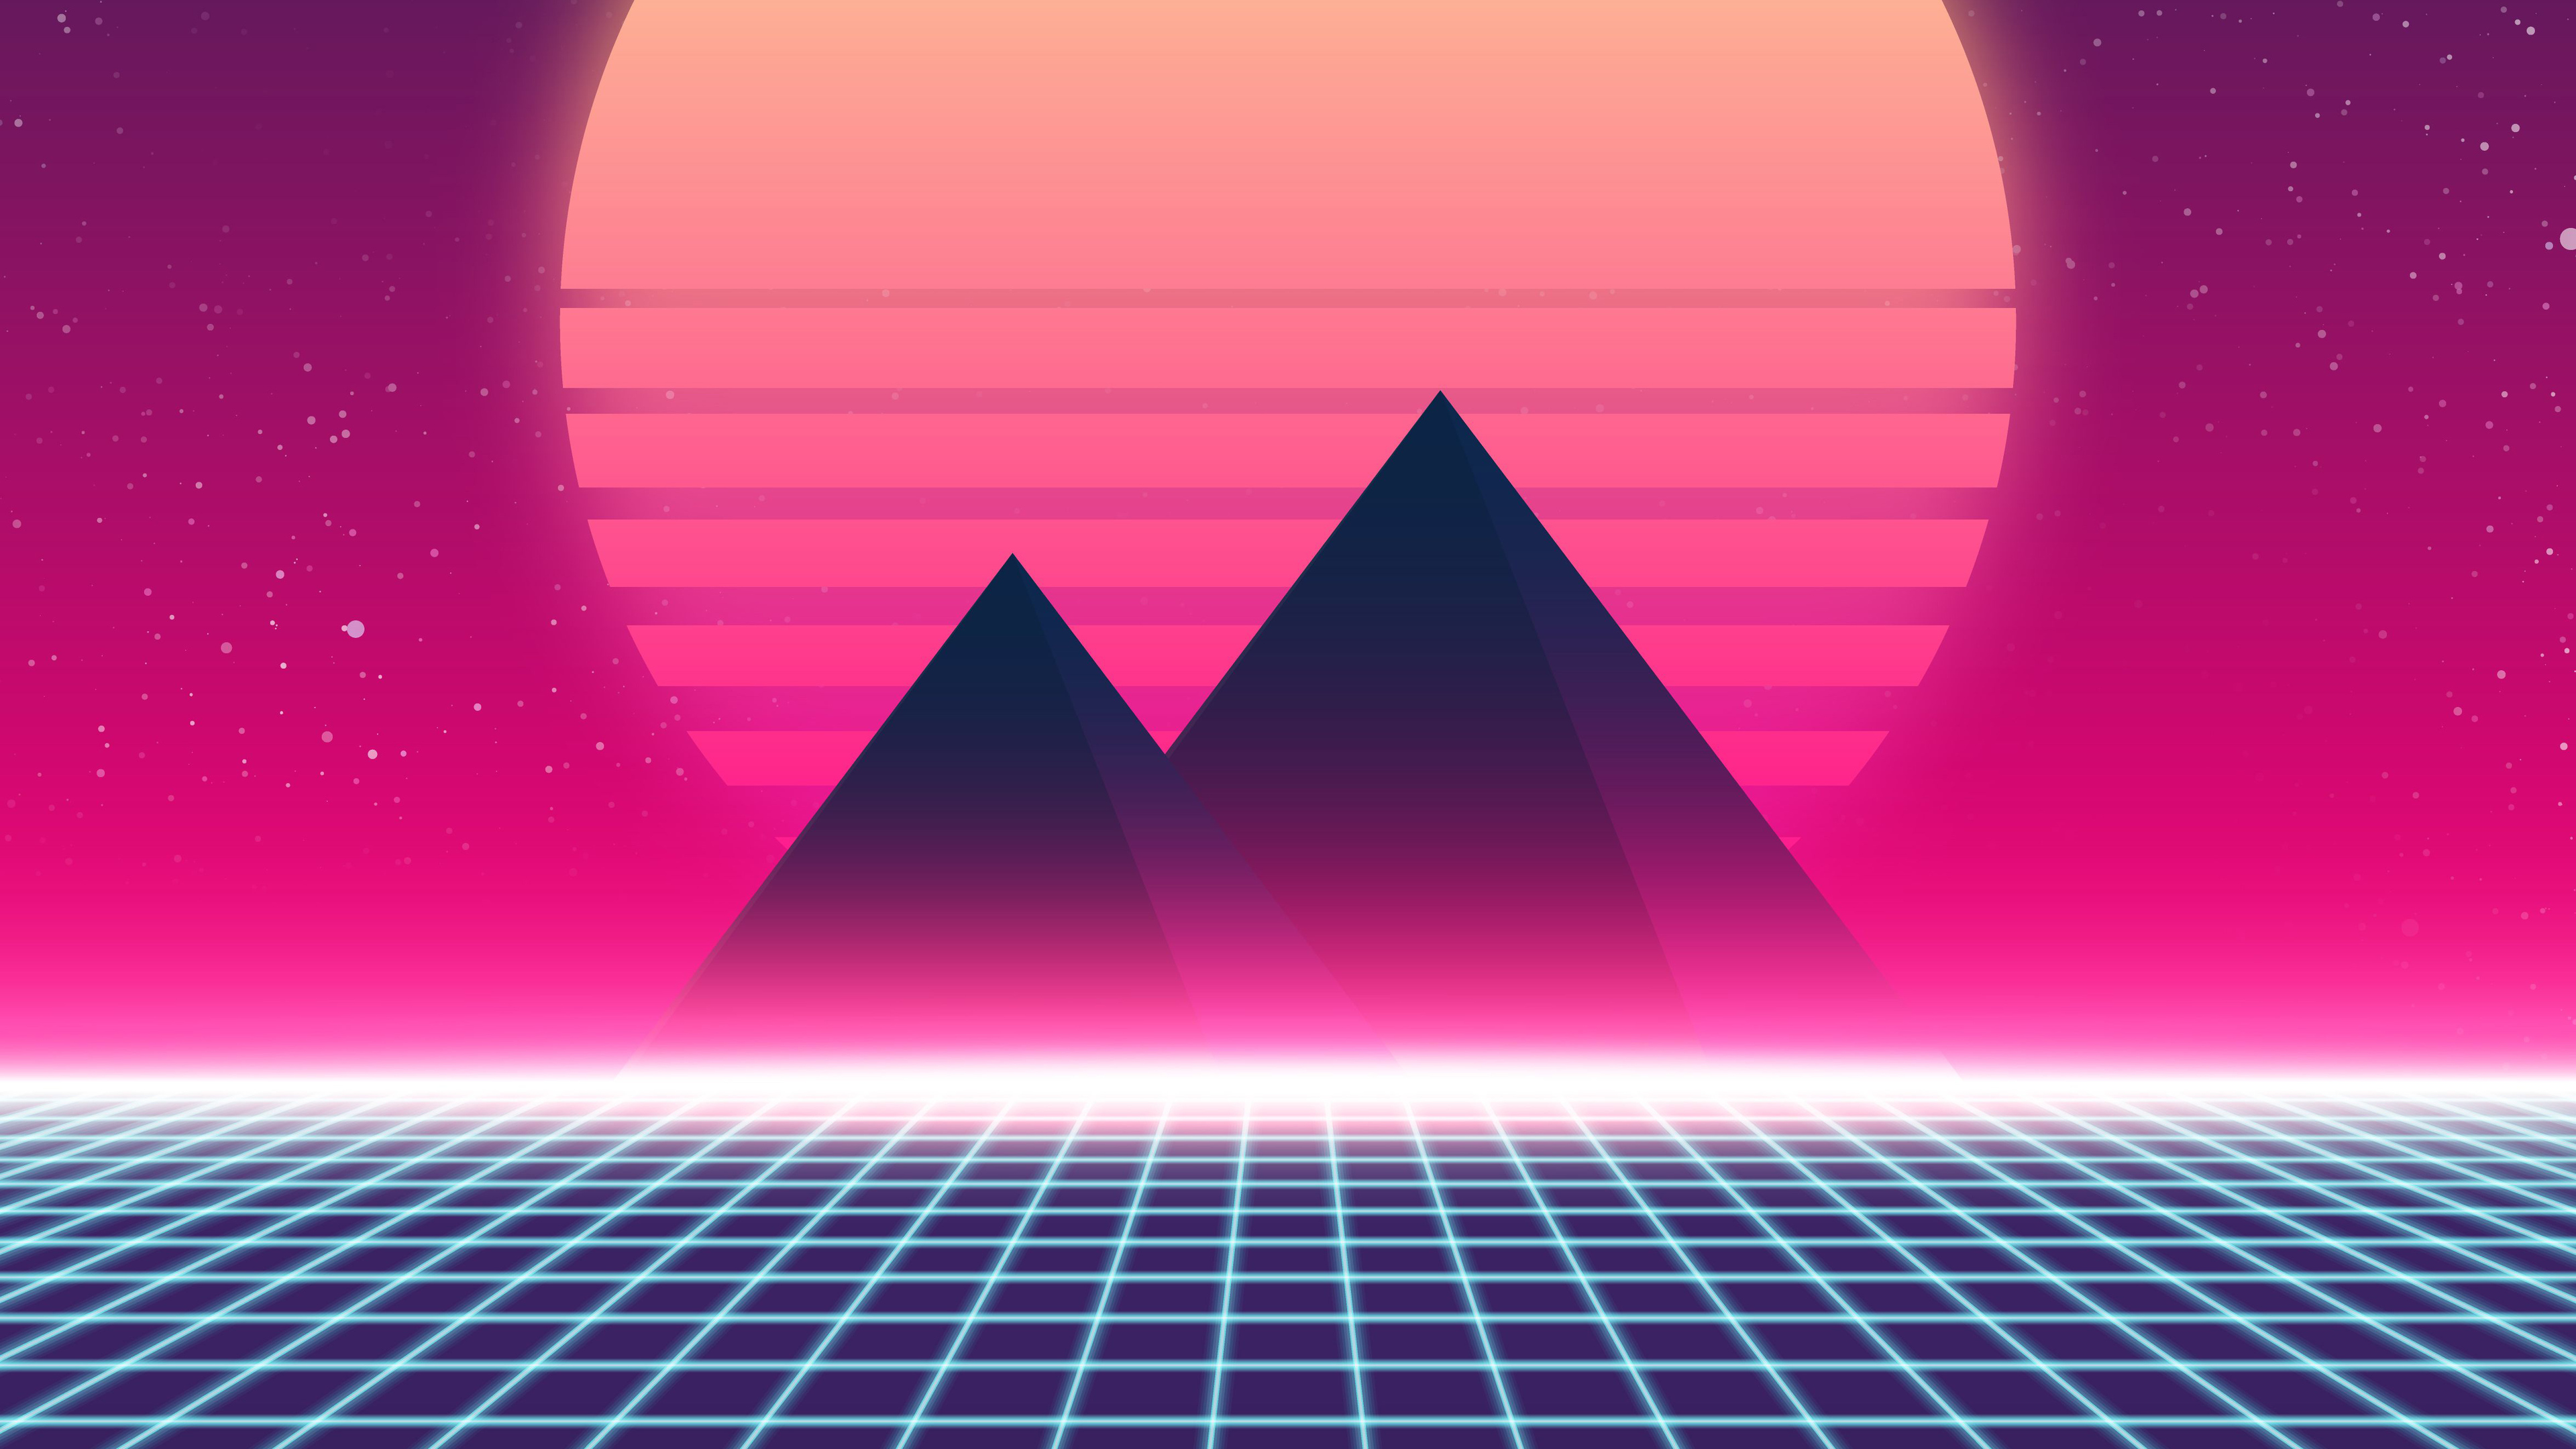 Top 999+ Retrowave Wallpaper Full HD, 4K✓Free to Use